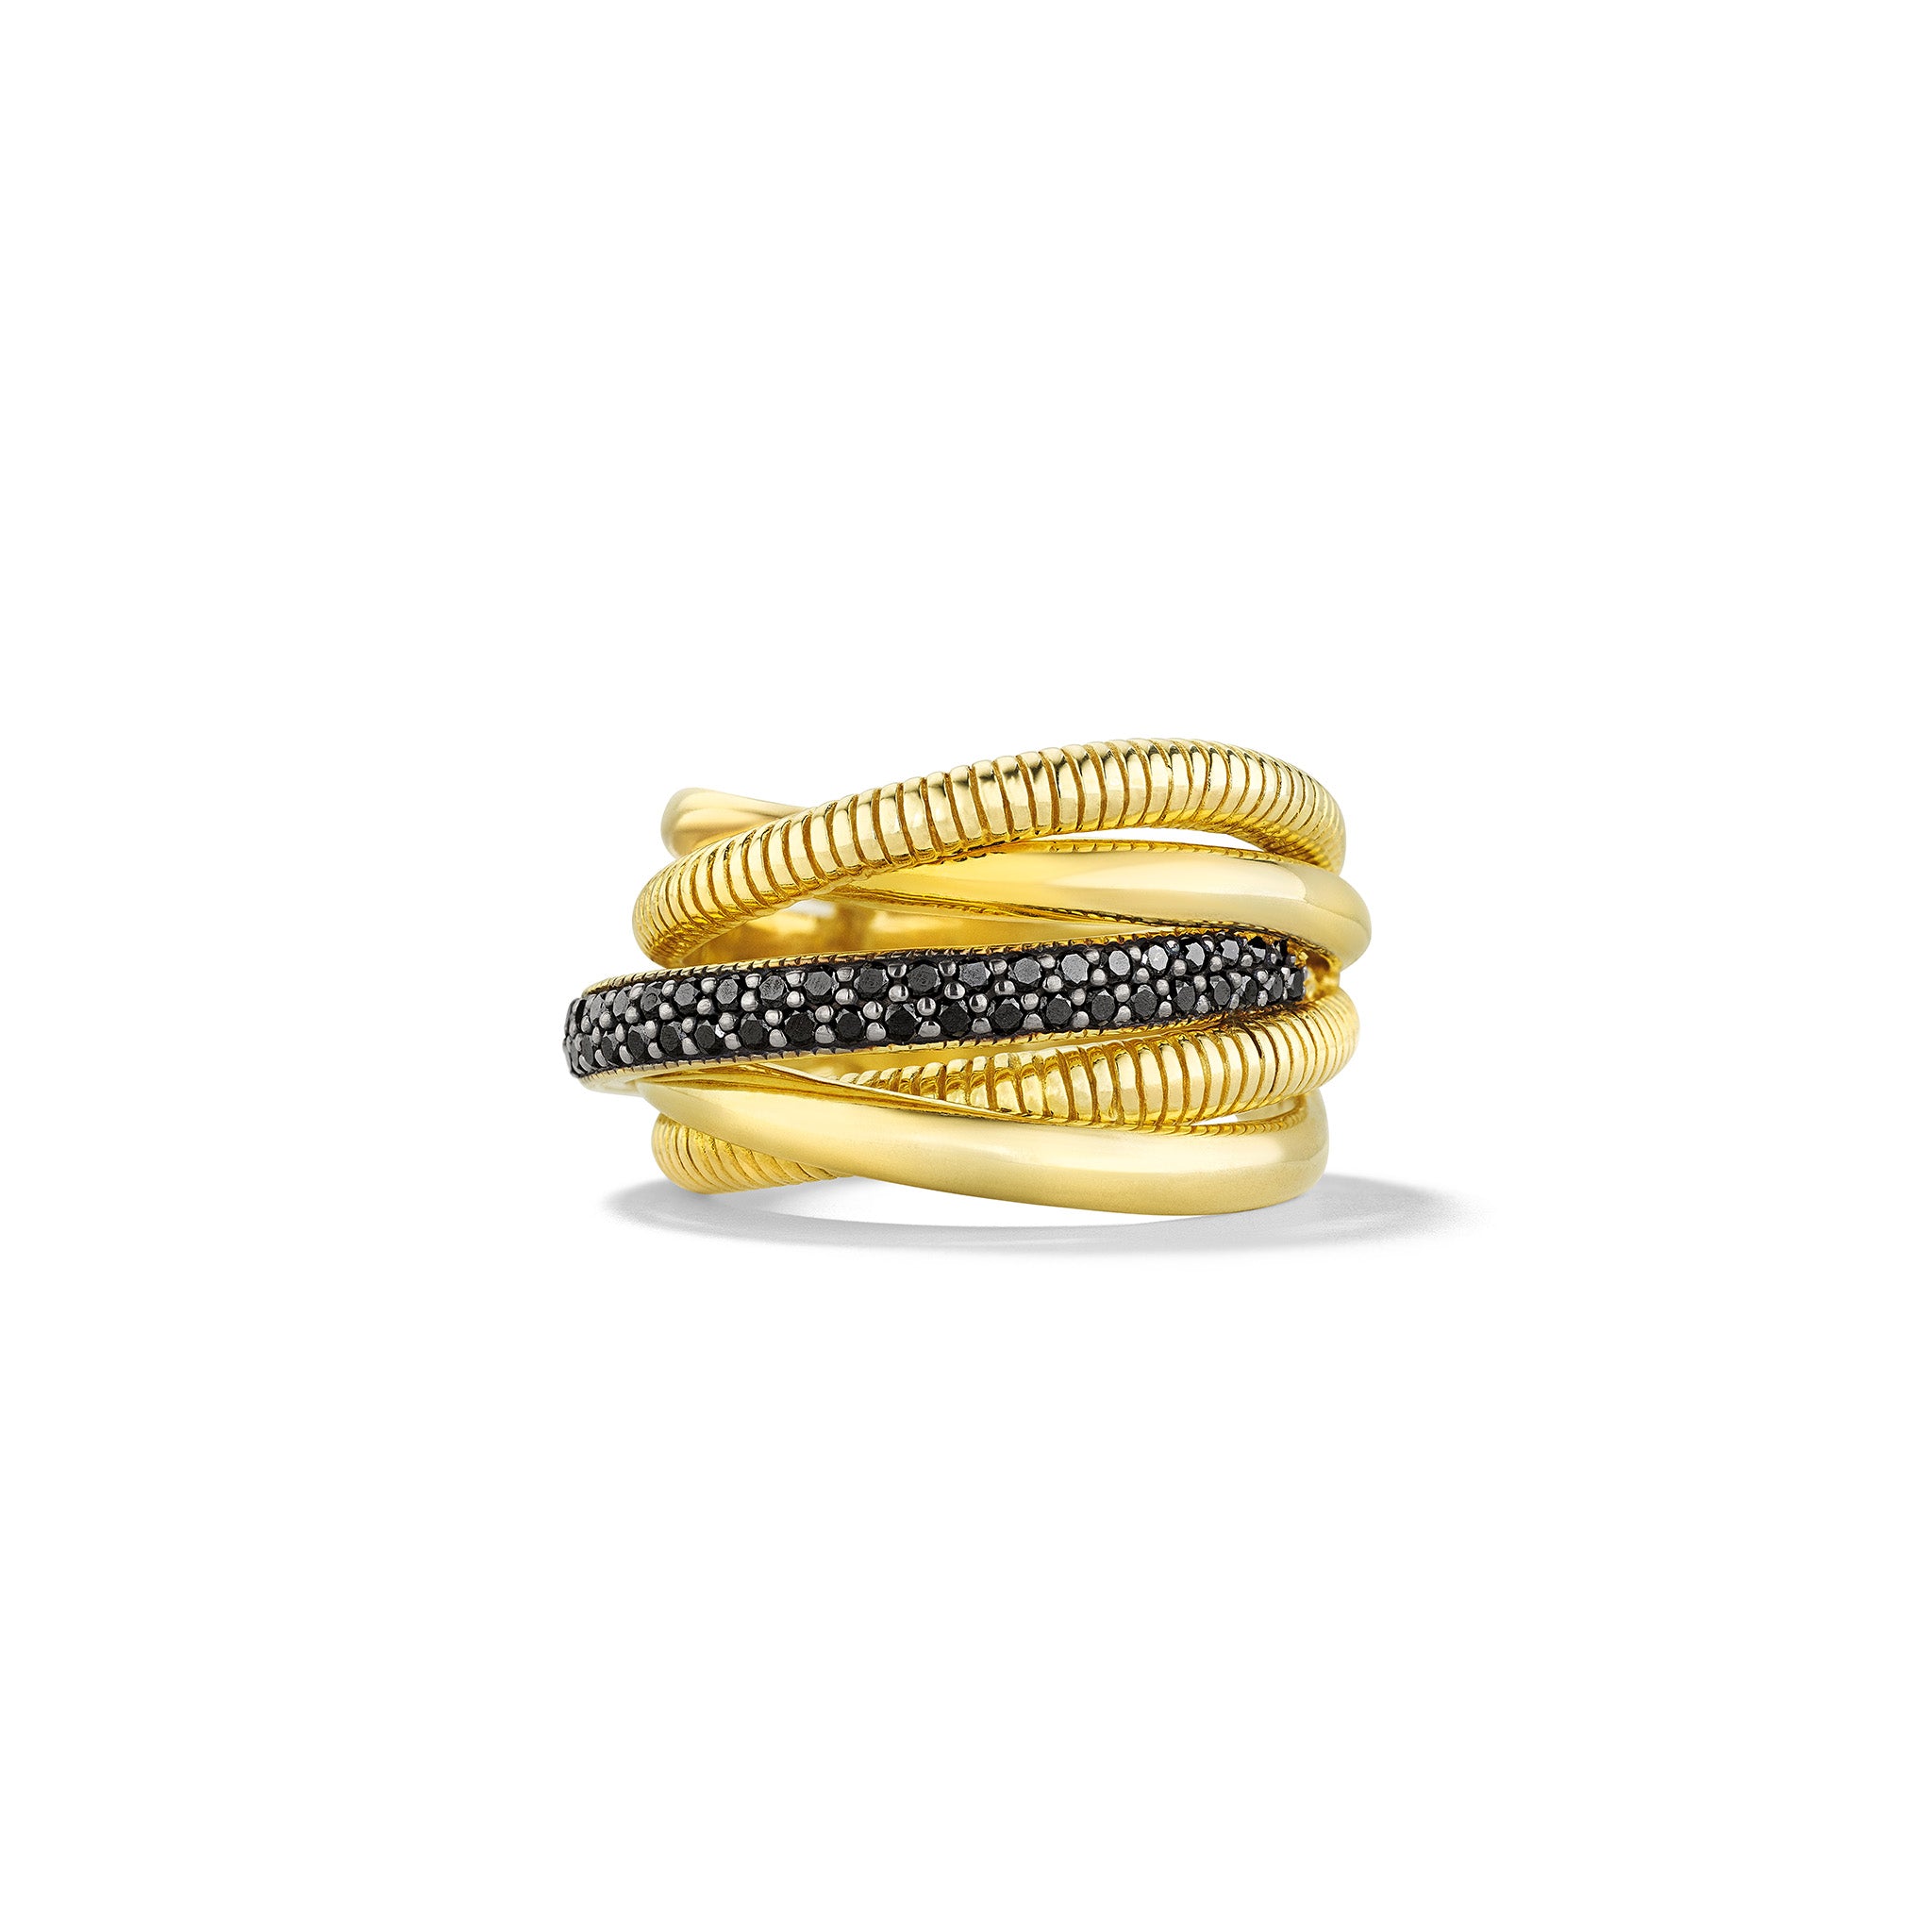 Eternity Five Band Highway Ring with Black Diamonds in 18K